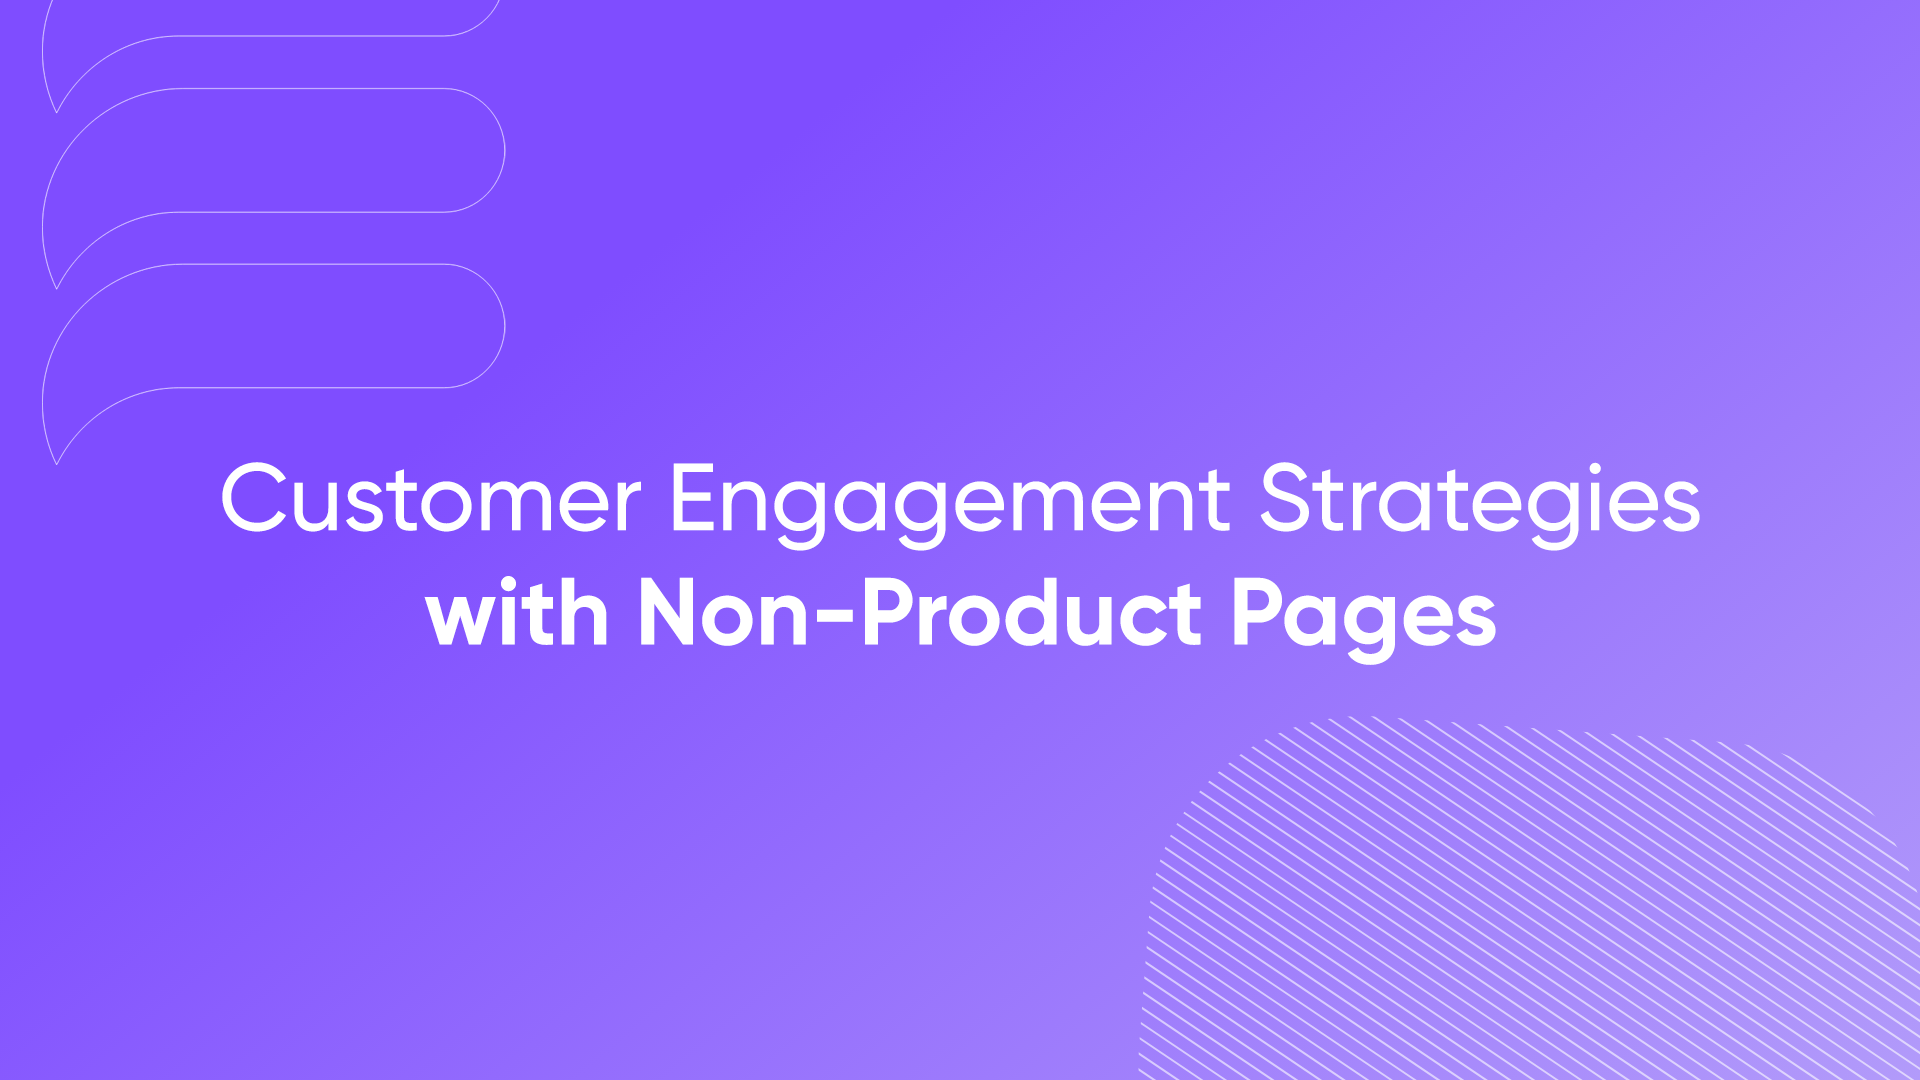 non product pages, how to use non-product pages, how to non product pages, using non-product pages, online store non-product pages, non product page benefits, website design tips, web design pages